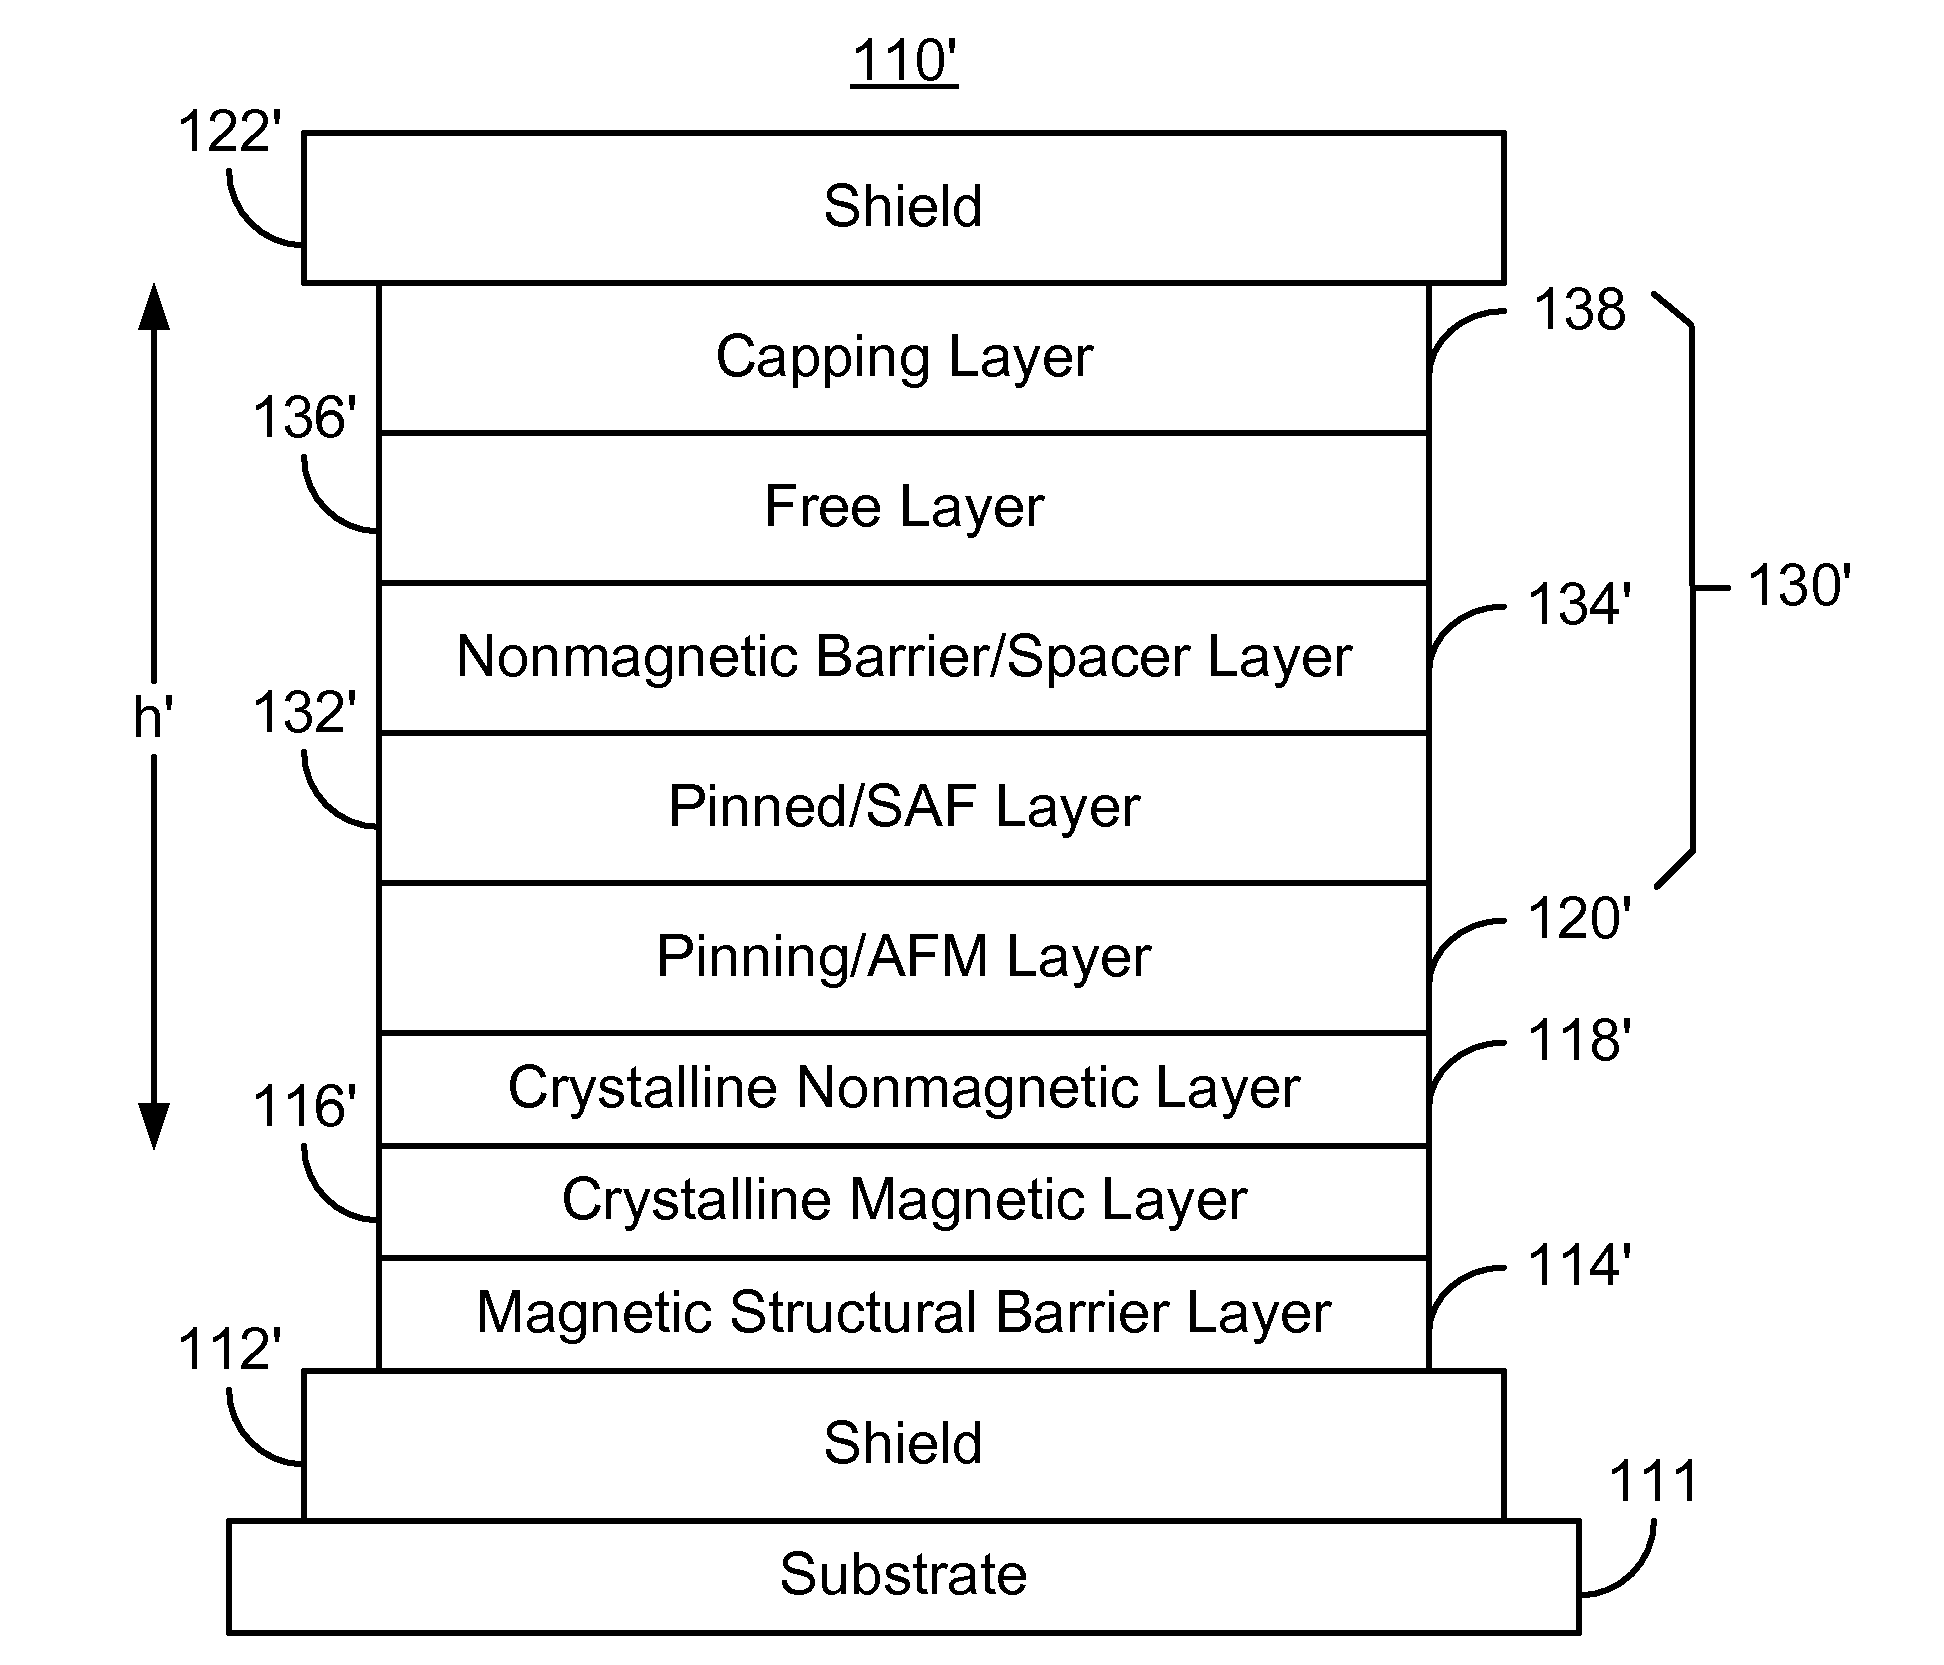 Method and system for providing a magnetic transducer having improved shield-to-shield spacing